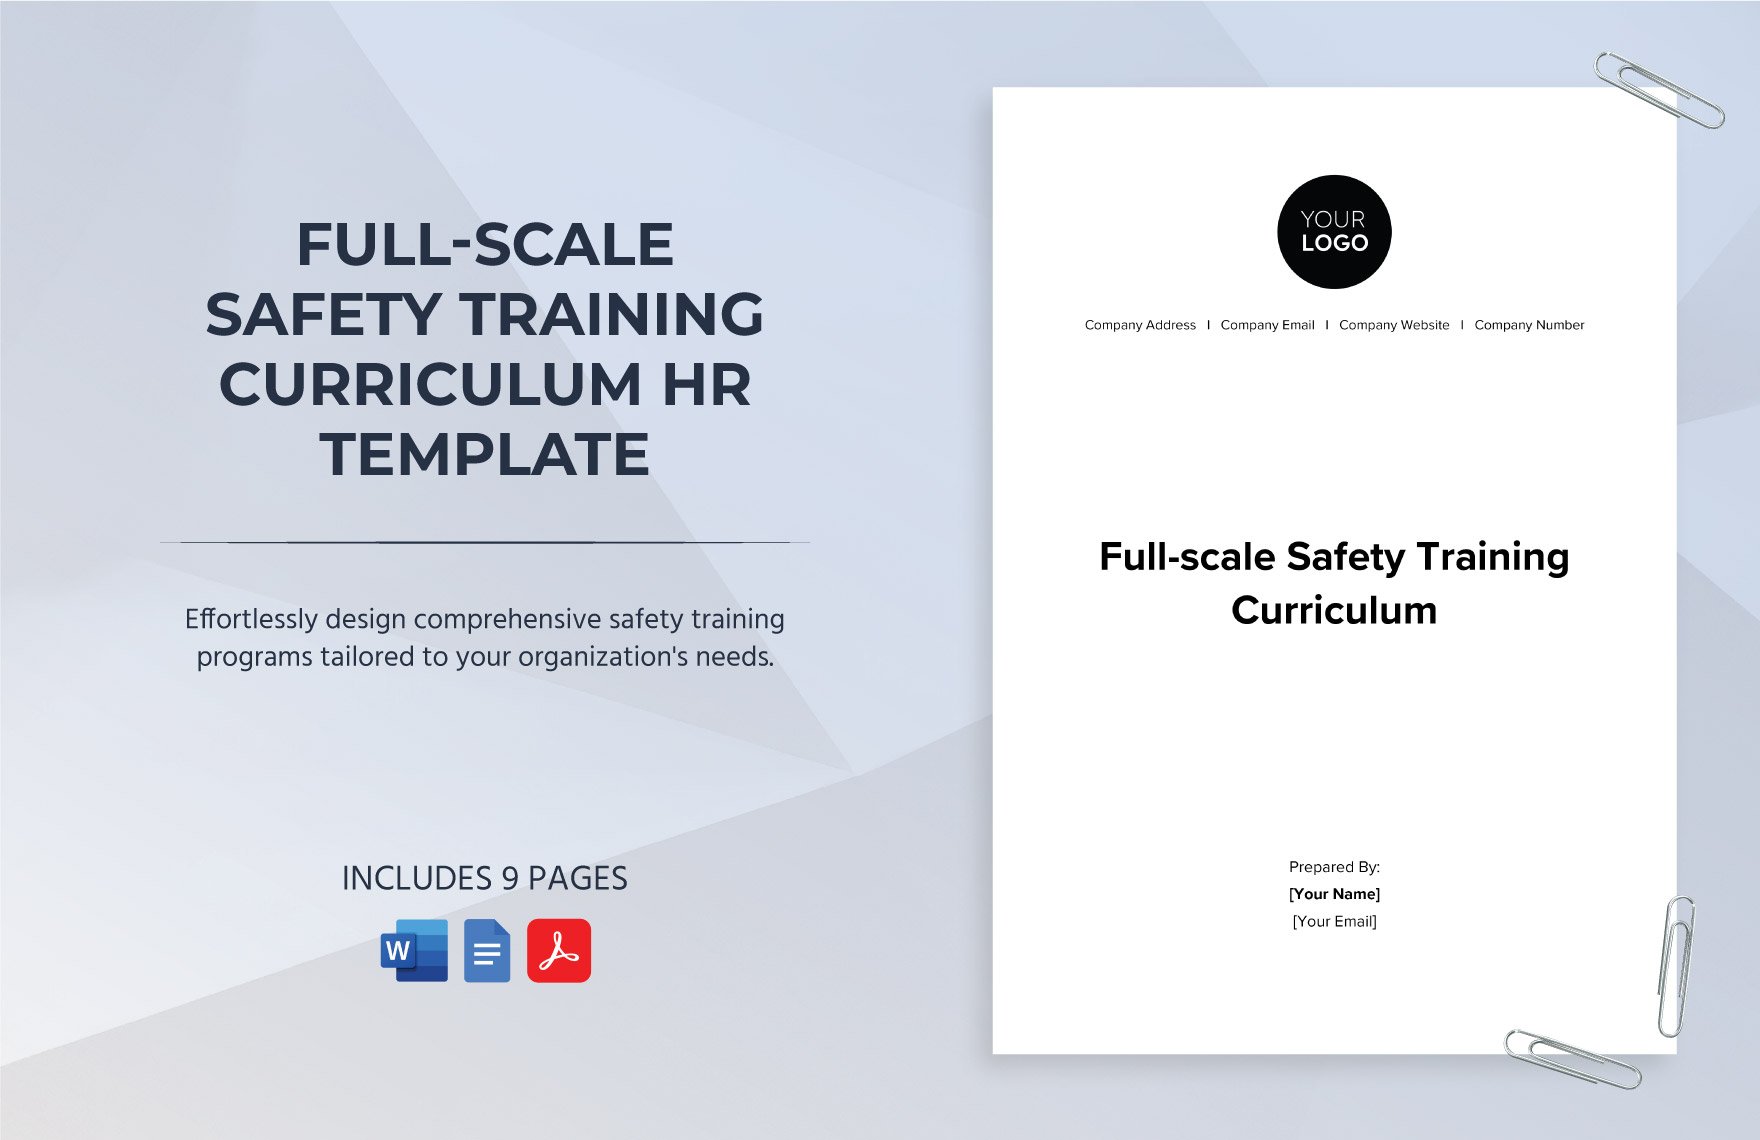 Full-scale Safety Training Curriculum HR Template in Word, Google Docs, PDF